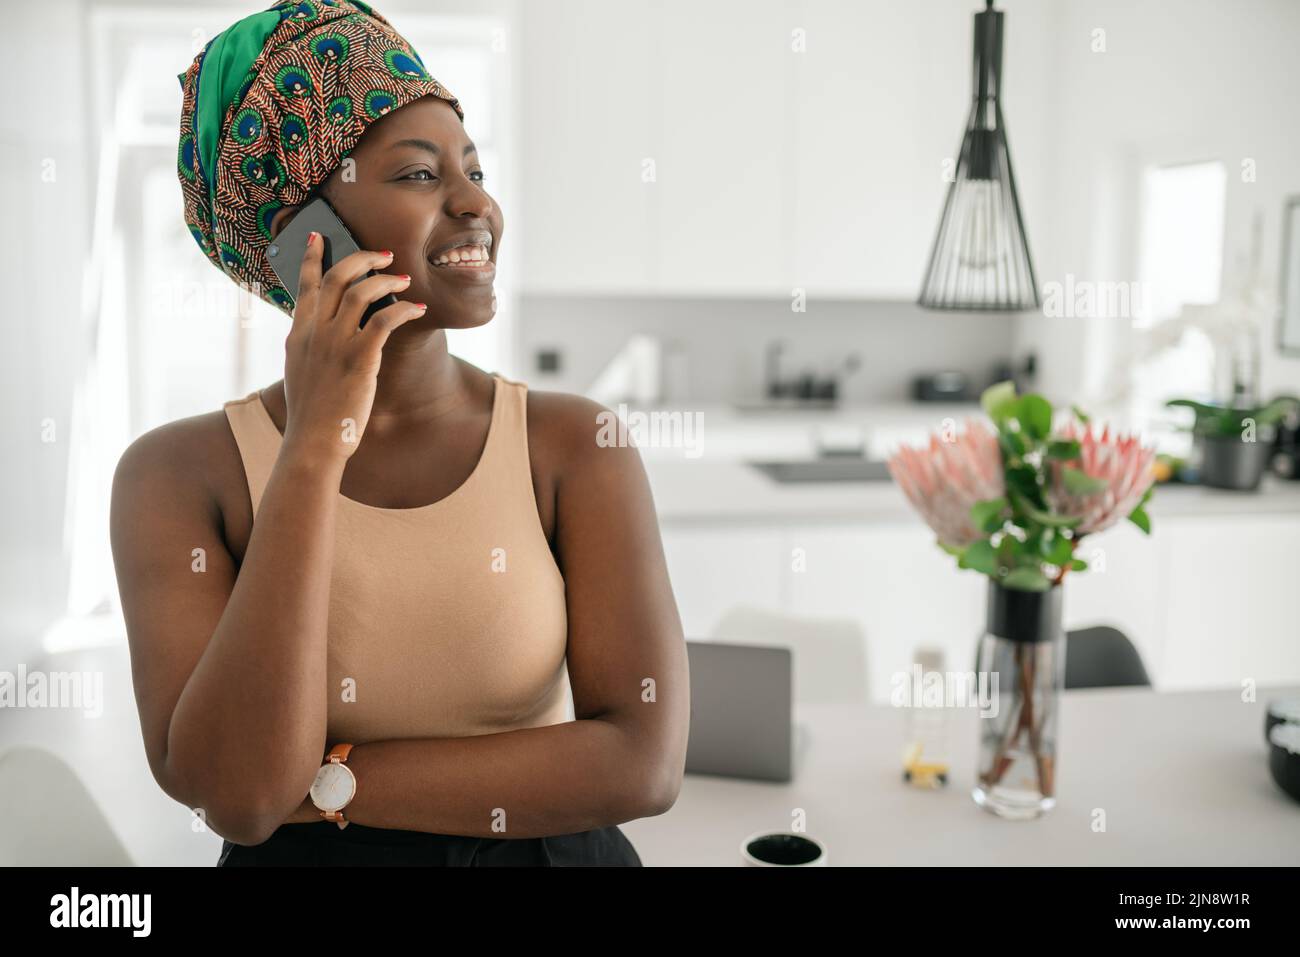 Beautiful African woman at home, smiling, using mobile smart phone, wearing traditional headscarf and looking into distance with copy space Stock Photo